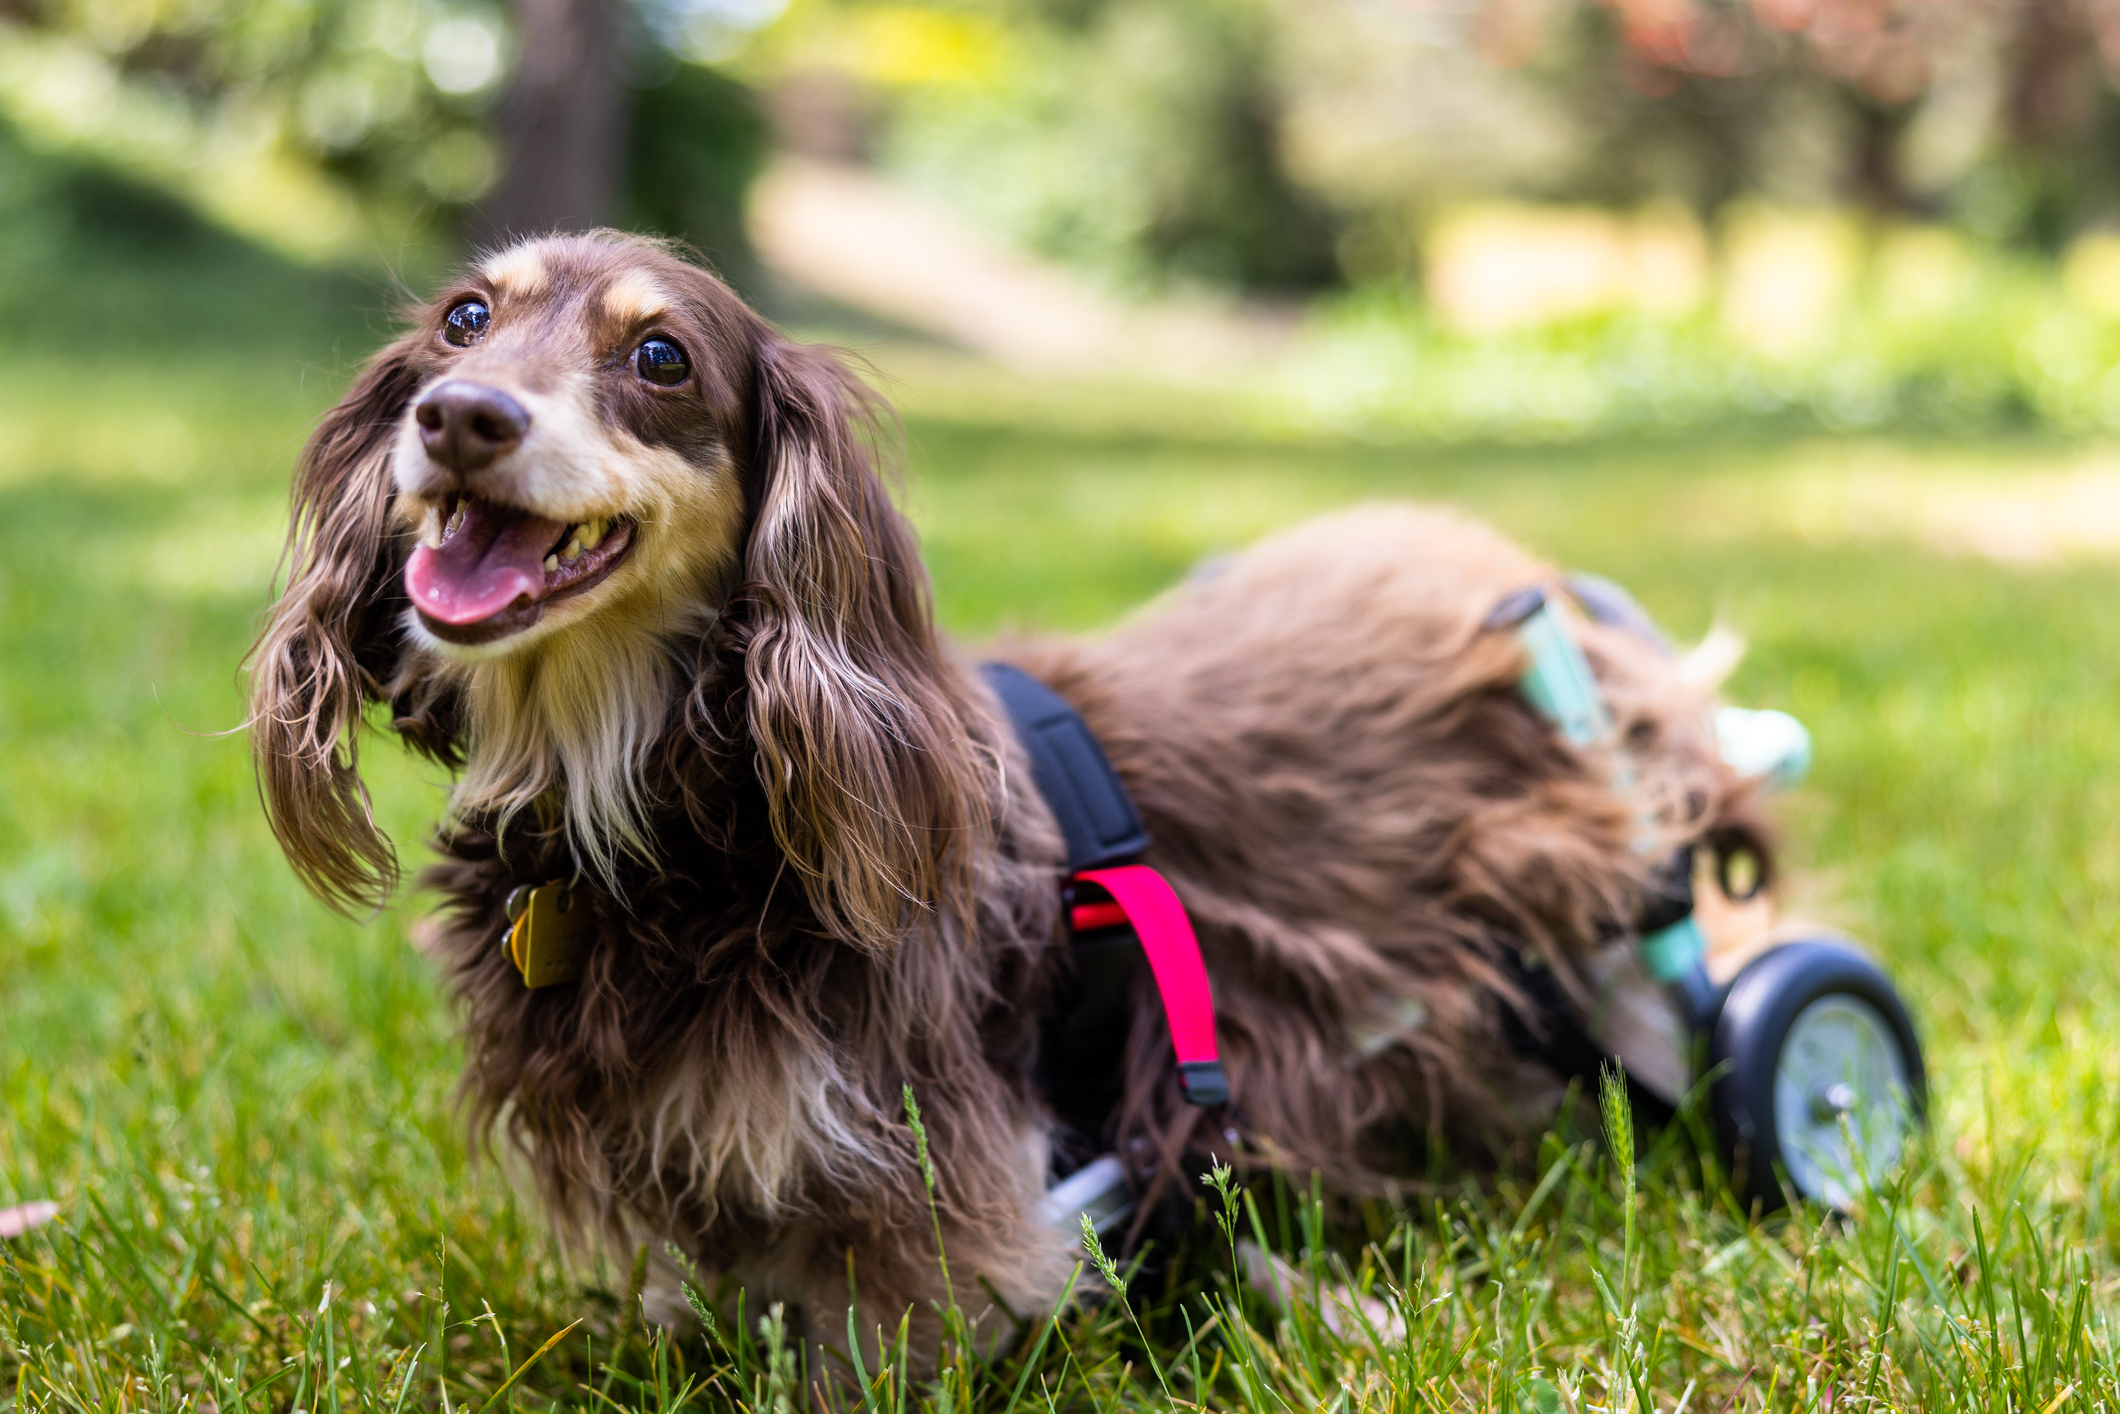 Long haired Dachshund with intervertebral disc disease (IVDD) smiling with doggy wheelchair mobility aid in grass